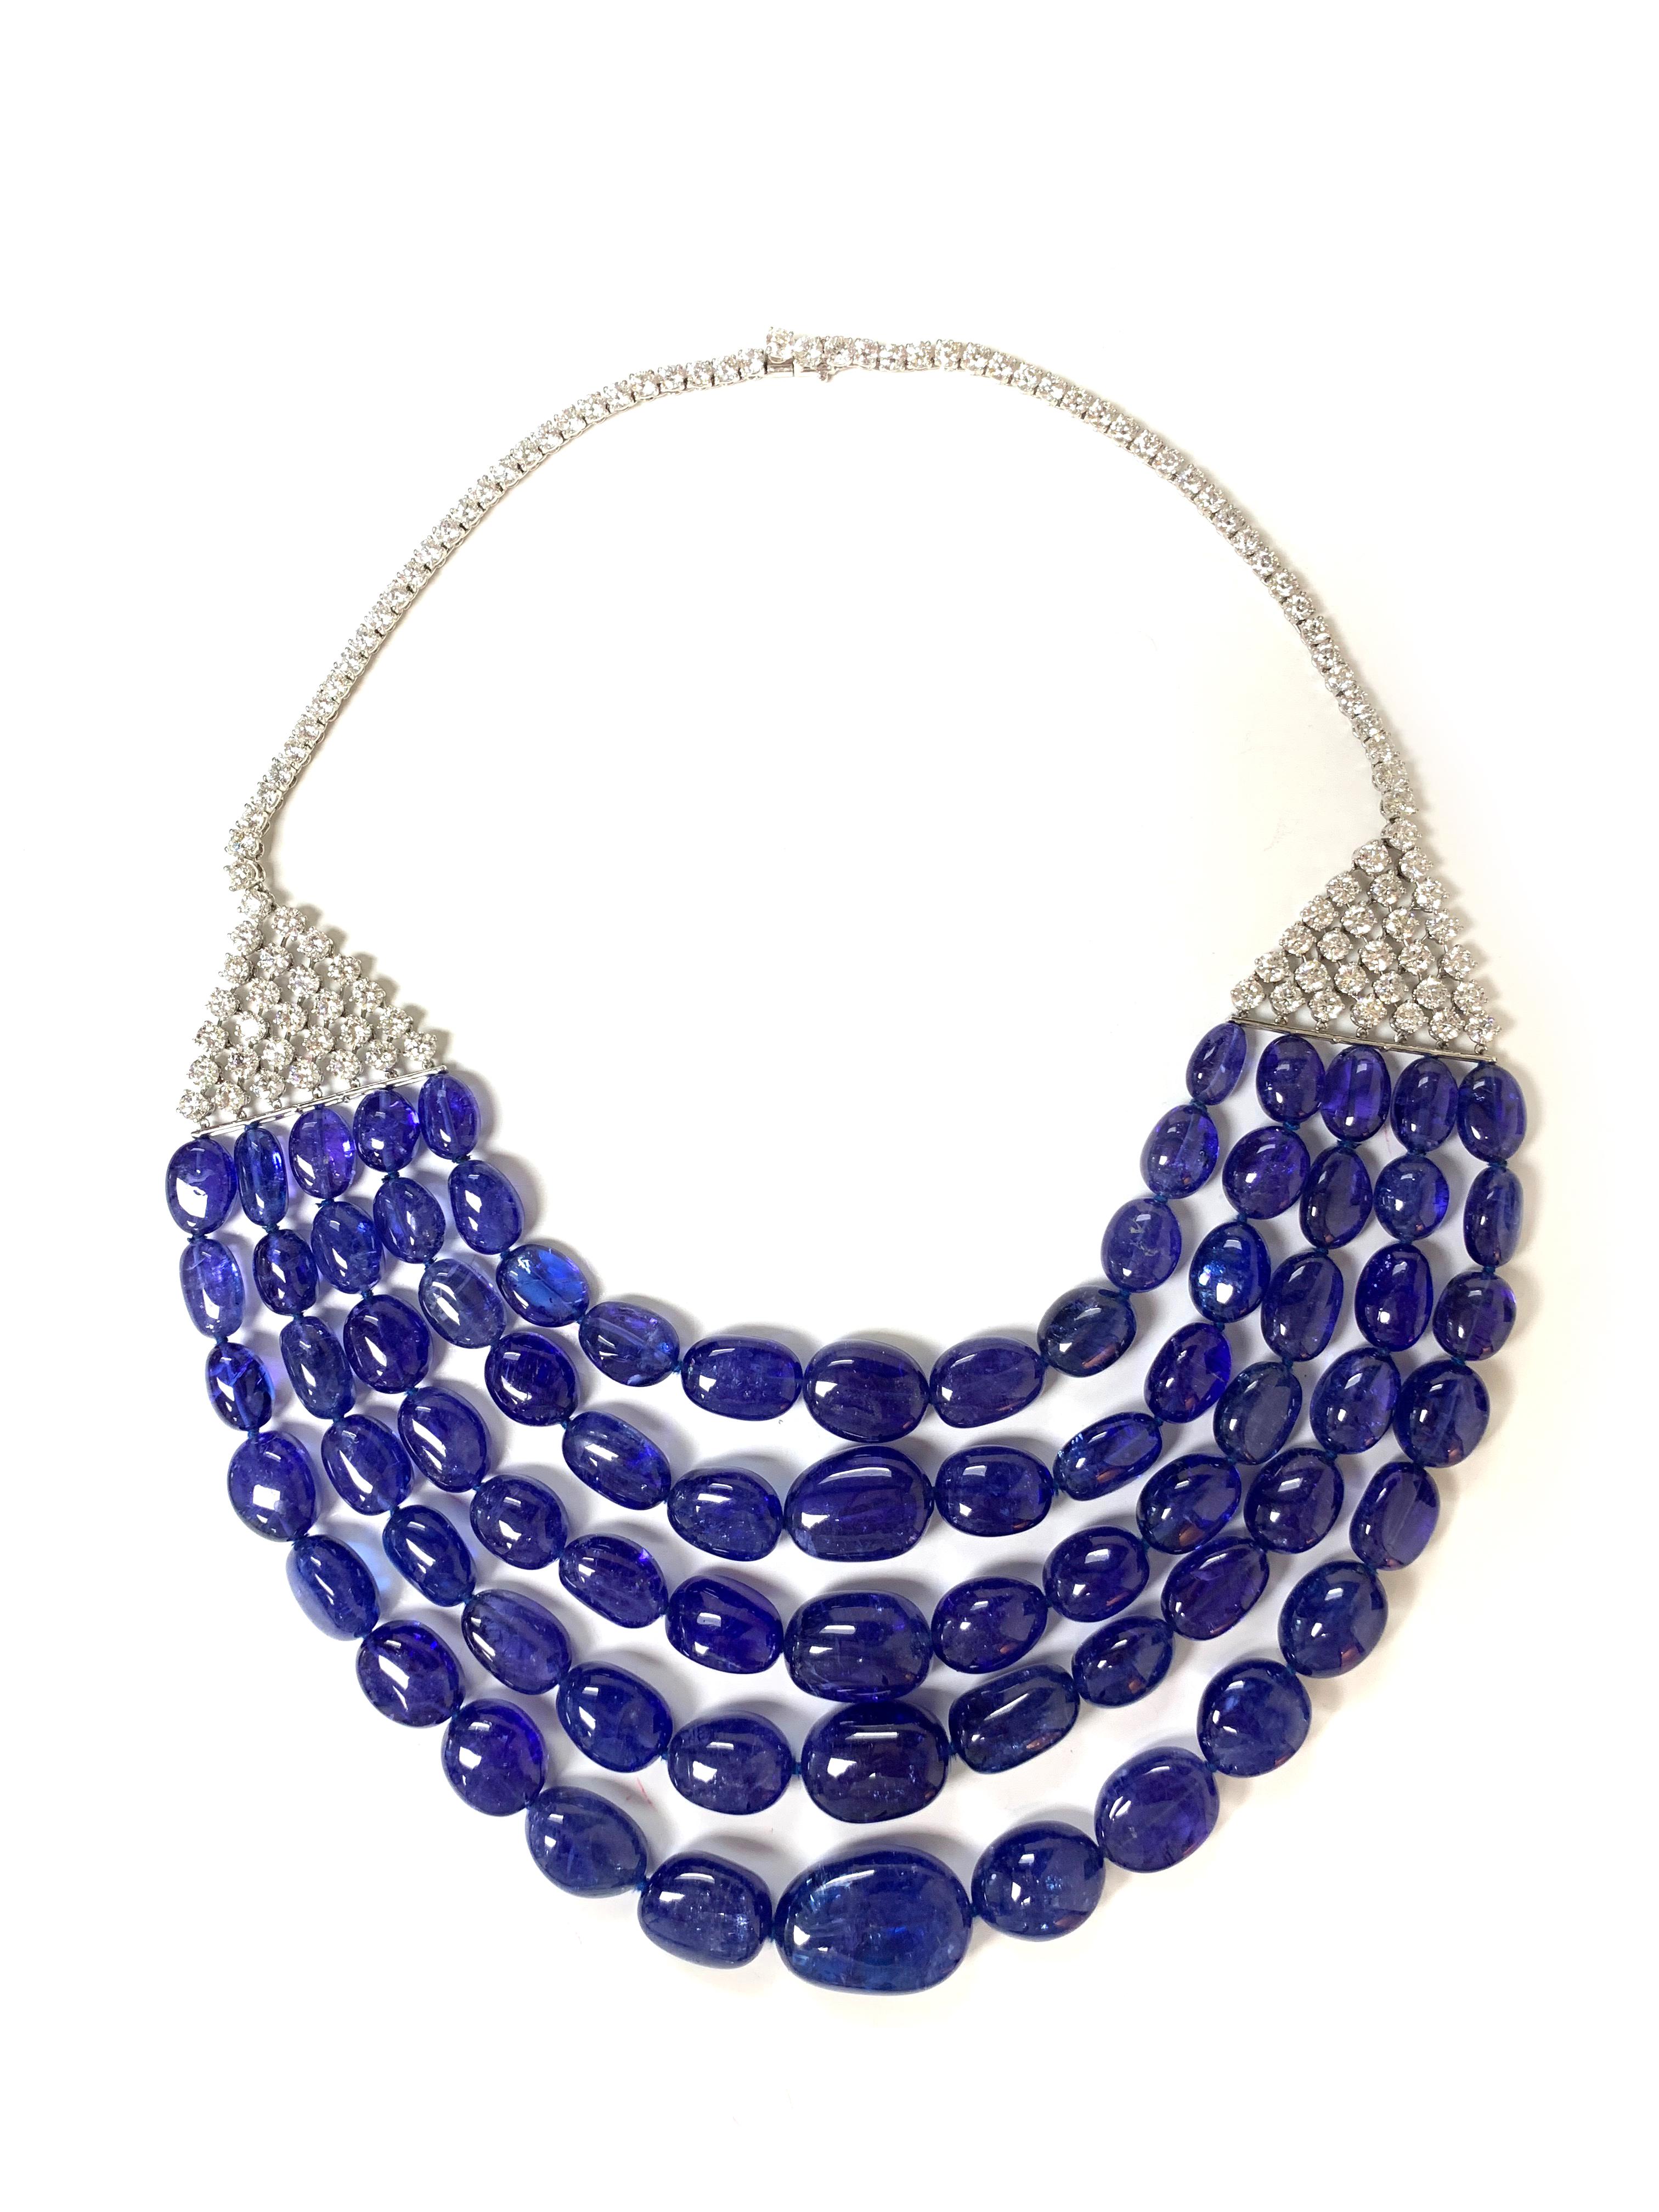 5 Strand Tanzanite Bead with Diamond Necklace in Platinum, from 'G-One' Collection. 

Diamonds: G-H / VS, Approx. Wt: 26.50 Carats 